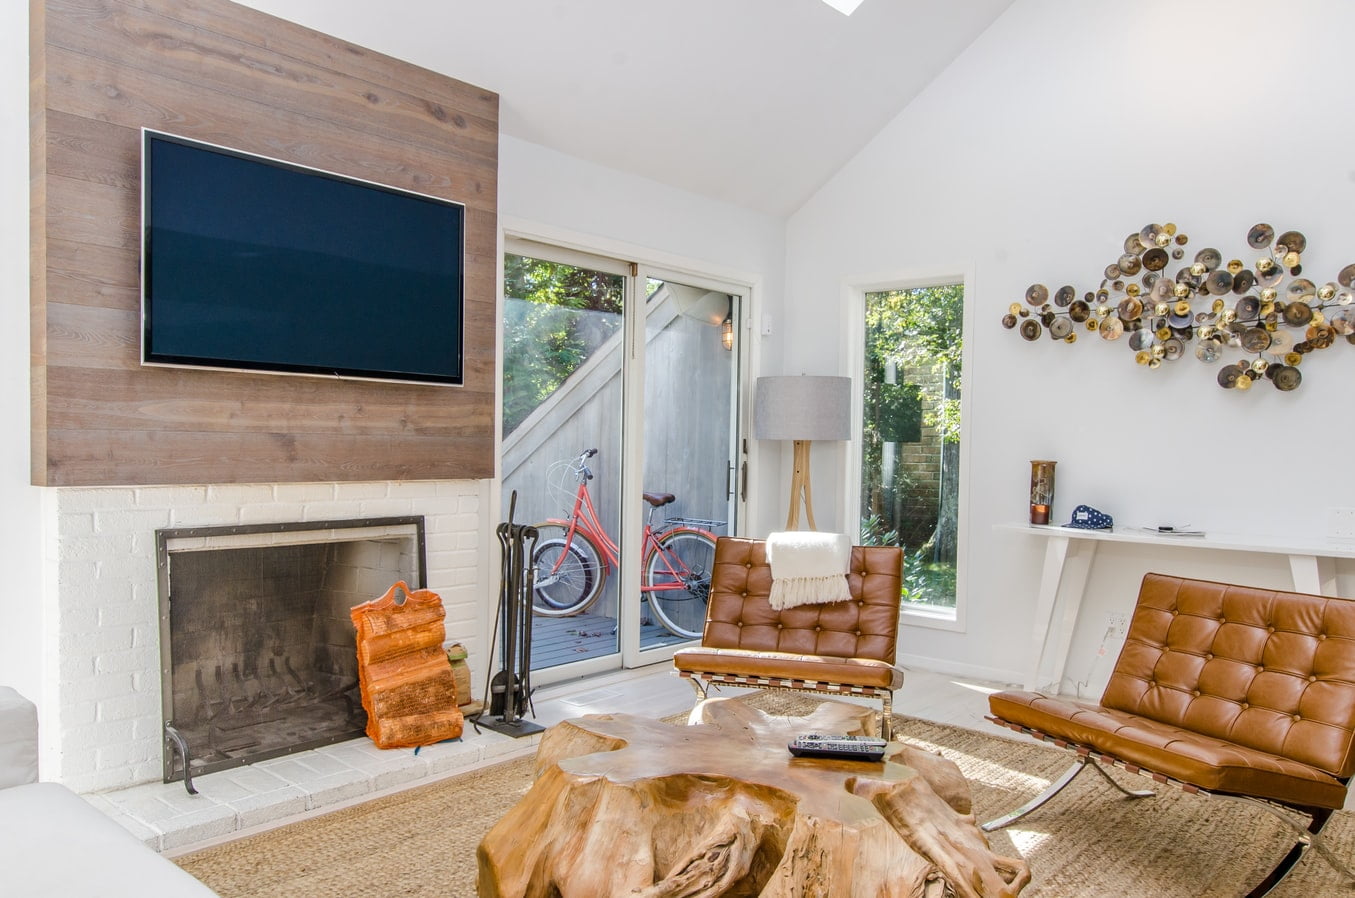 9 Best Pull Down TV Mounts to Use in 2019 1